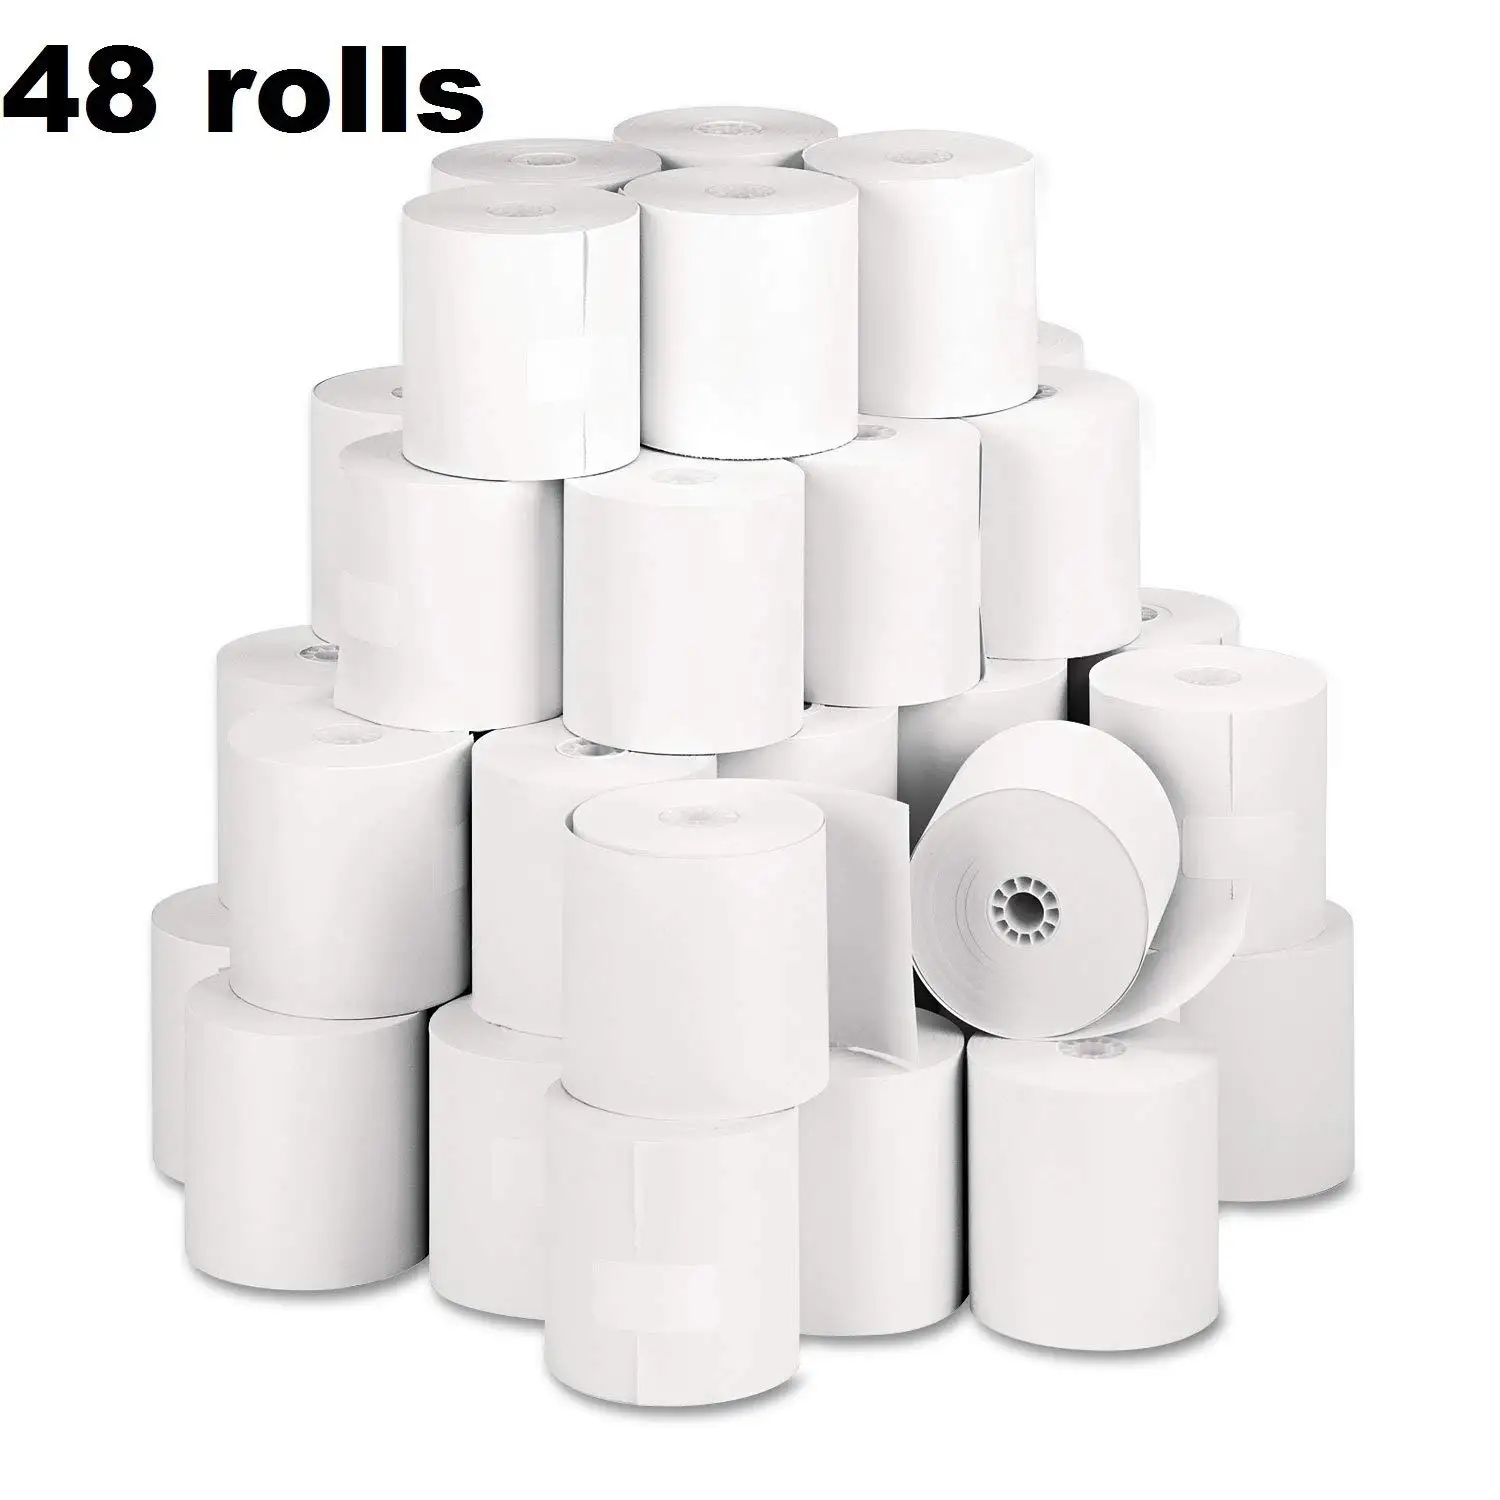 Made in USA BPA FREE Square POS Register Thermal Receipt Paper Rolls 3-1/8 inches x 230ft 60 Pack Epsilont 